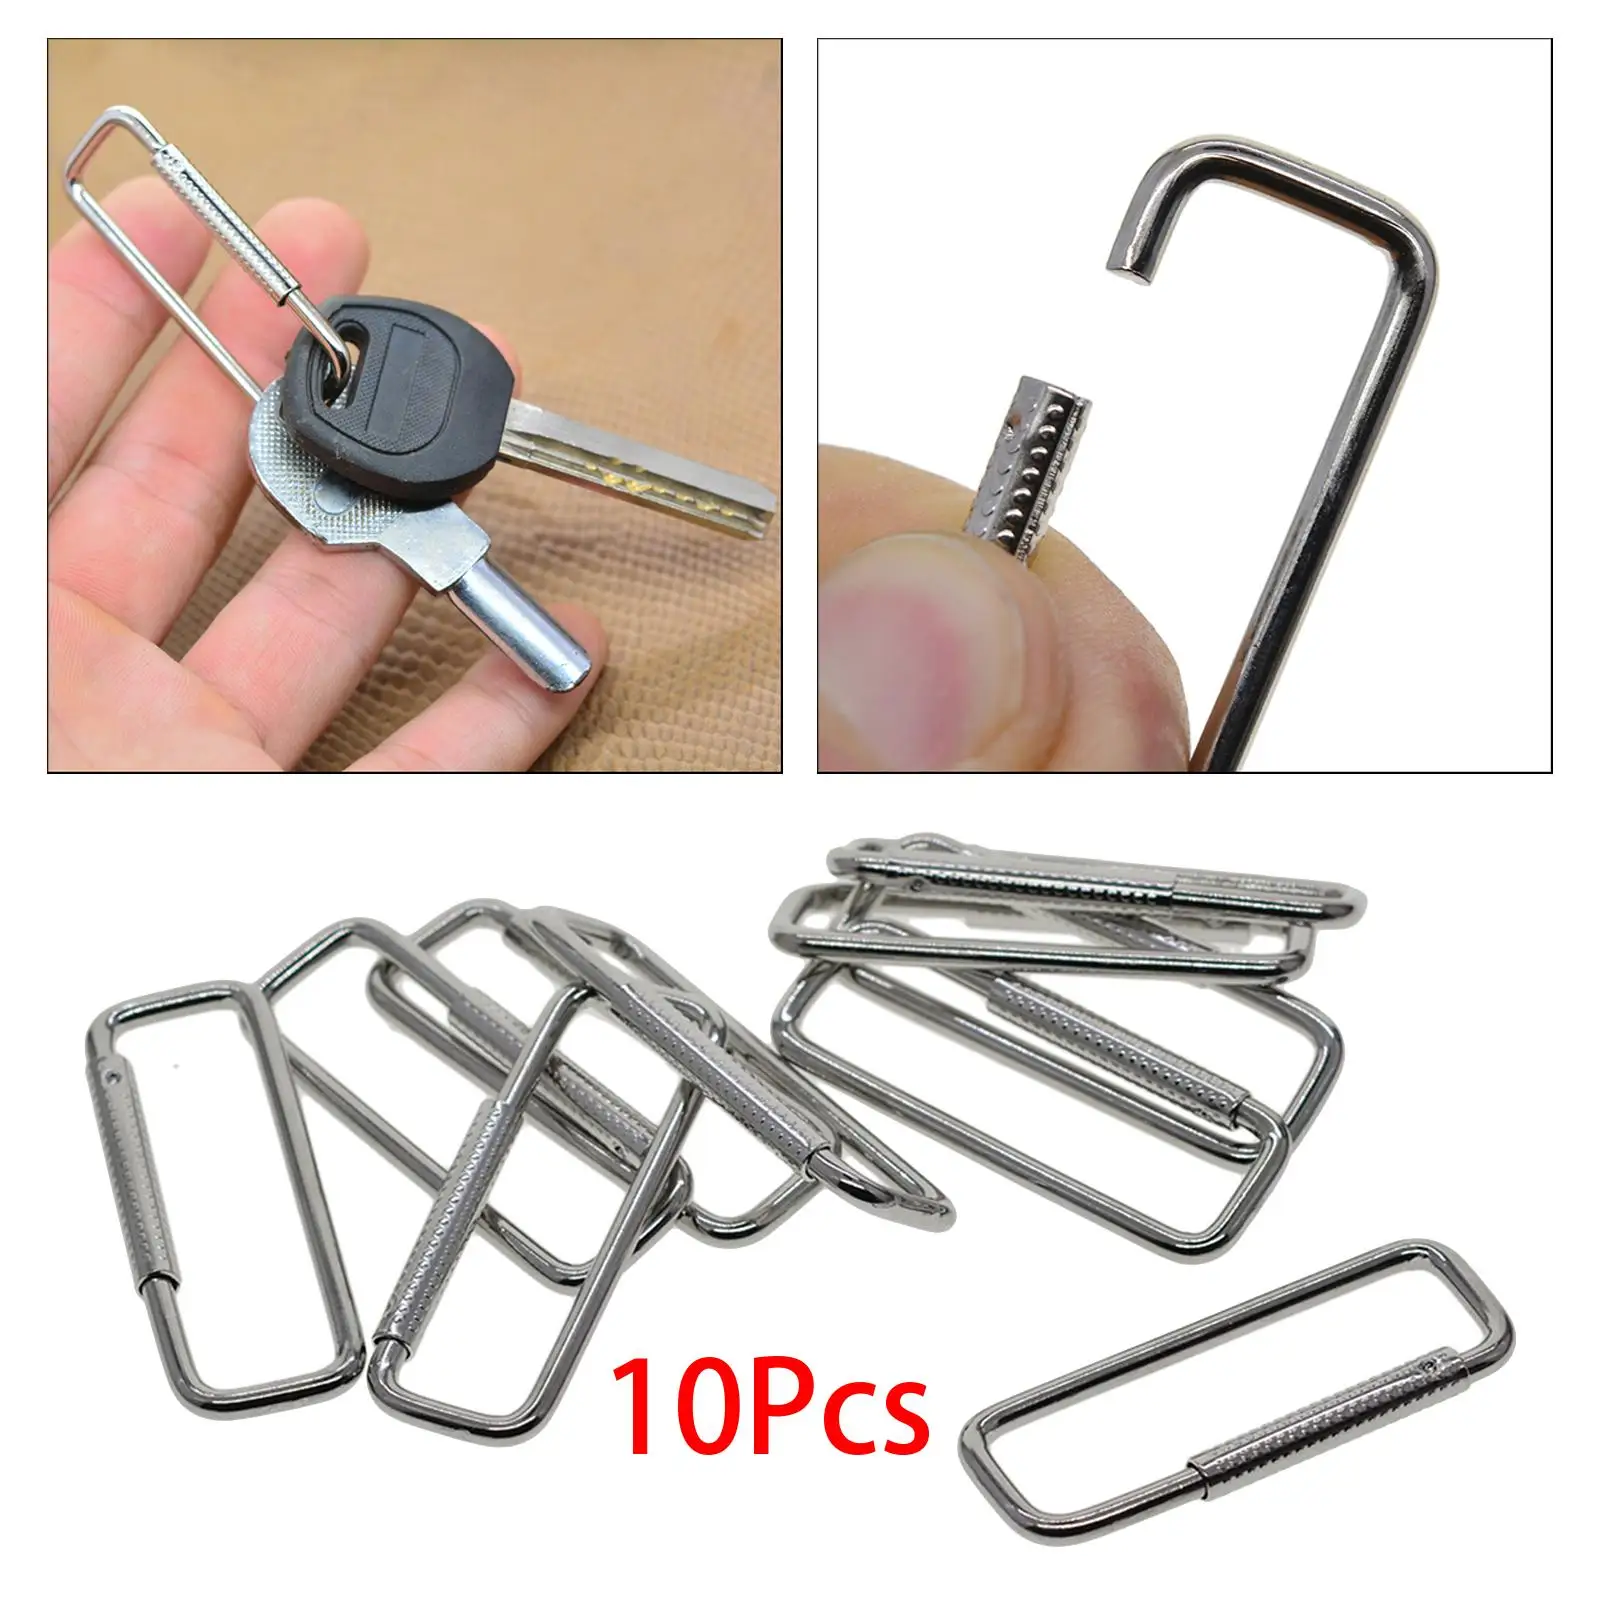 10x Rectangle Carabiner Clips Metal Durable Multipurpose Sturdy DIY Keychain Clips for Bags Backpack Outdoor Indoor Dog Tags